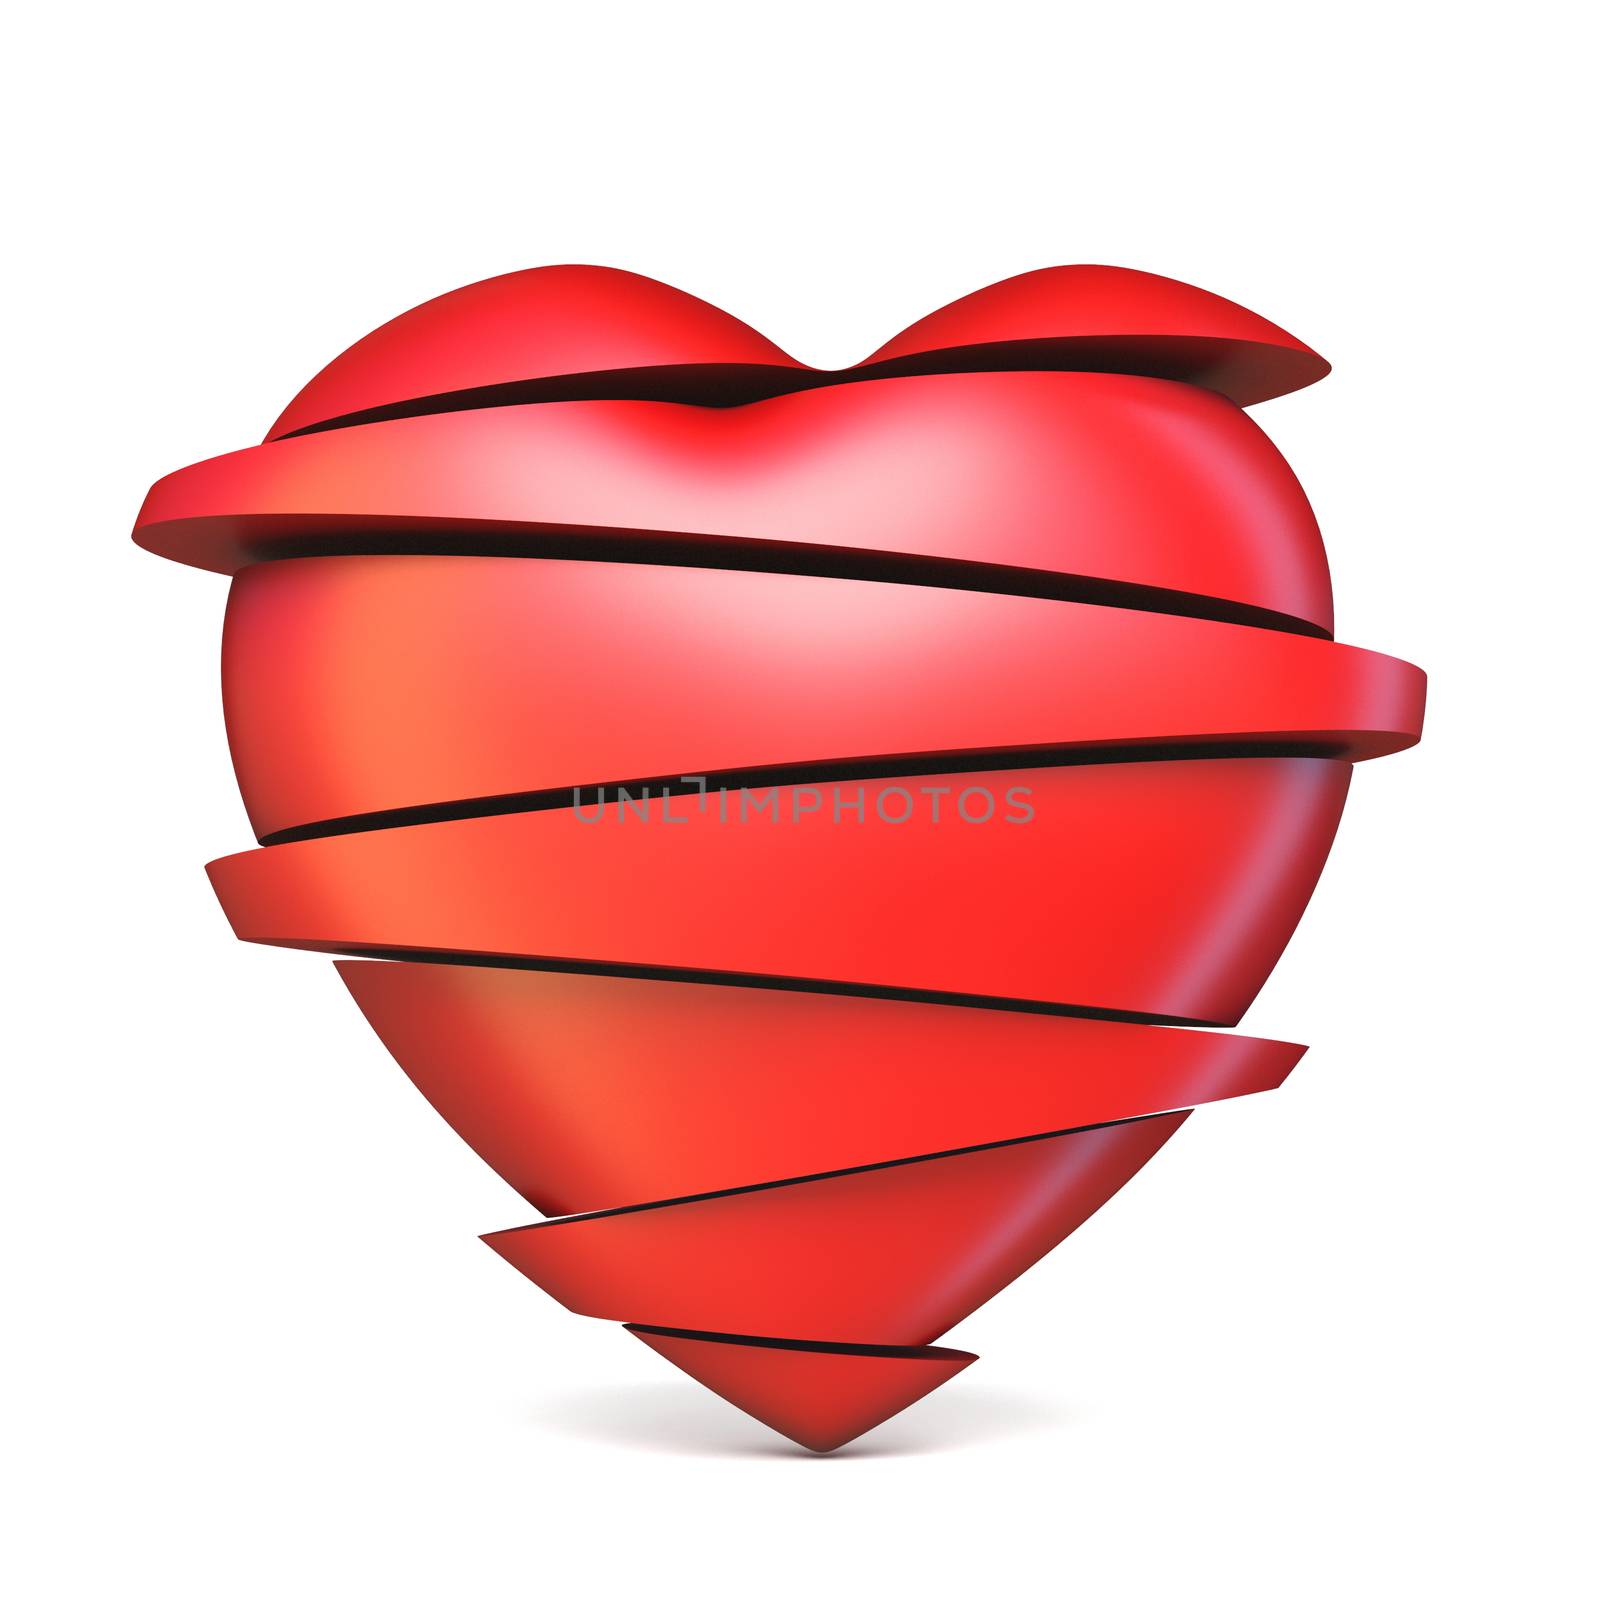 Sliced red heart 3D rendering illustration isolated on white background